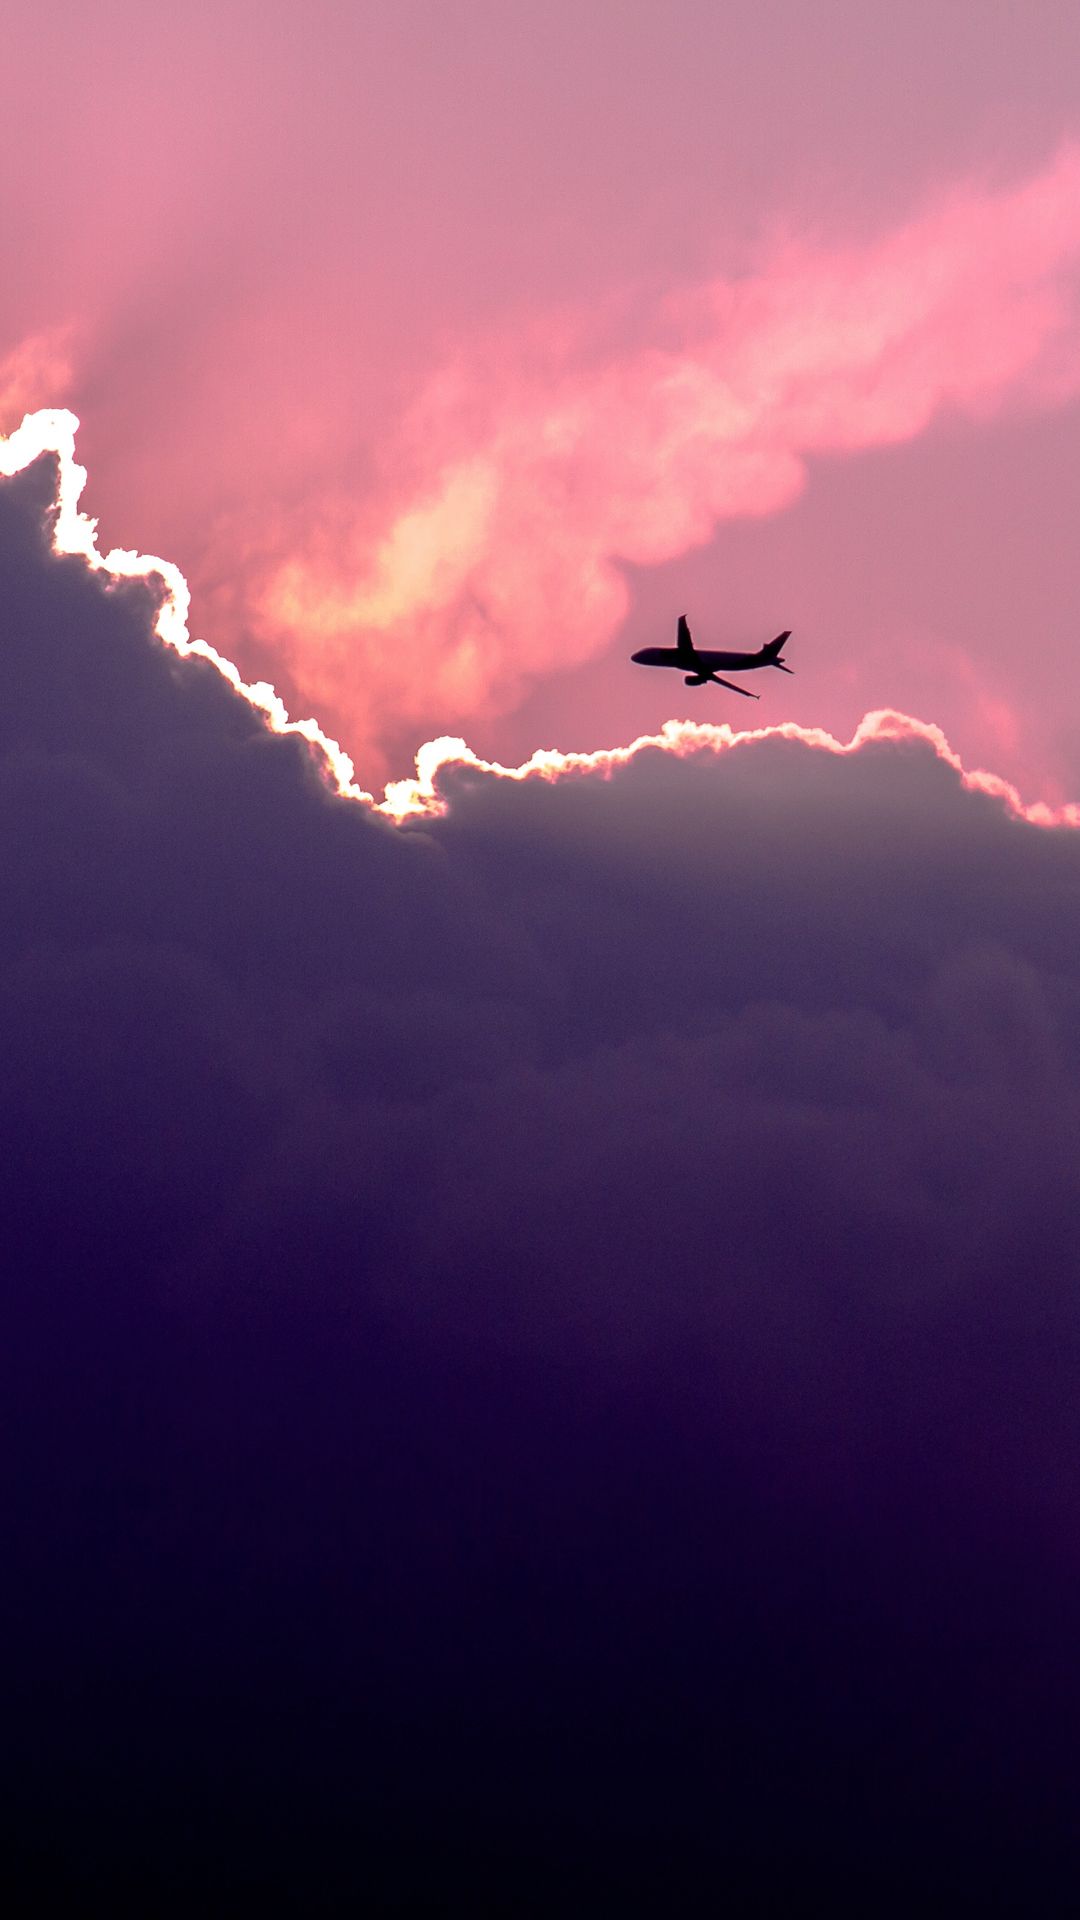 Plane Above Sunset Clouds iPhone 8 Wallpaper Free Download